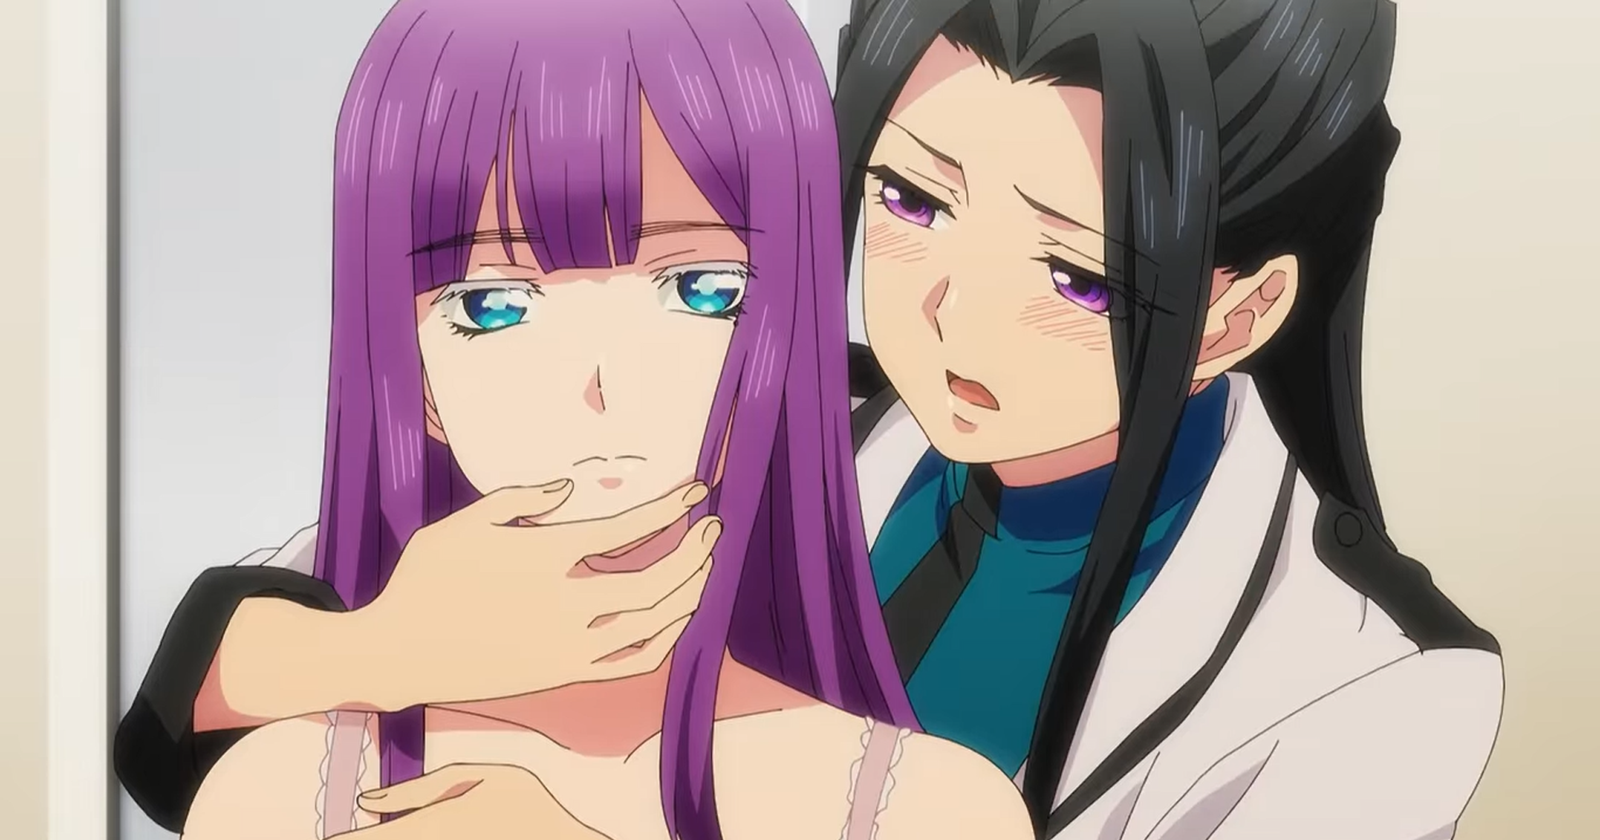 World's End Harem Episode 1 Is Finally Here and Heavily Censored